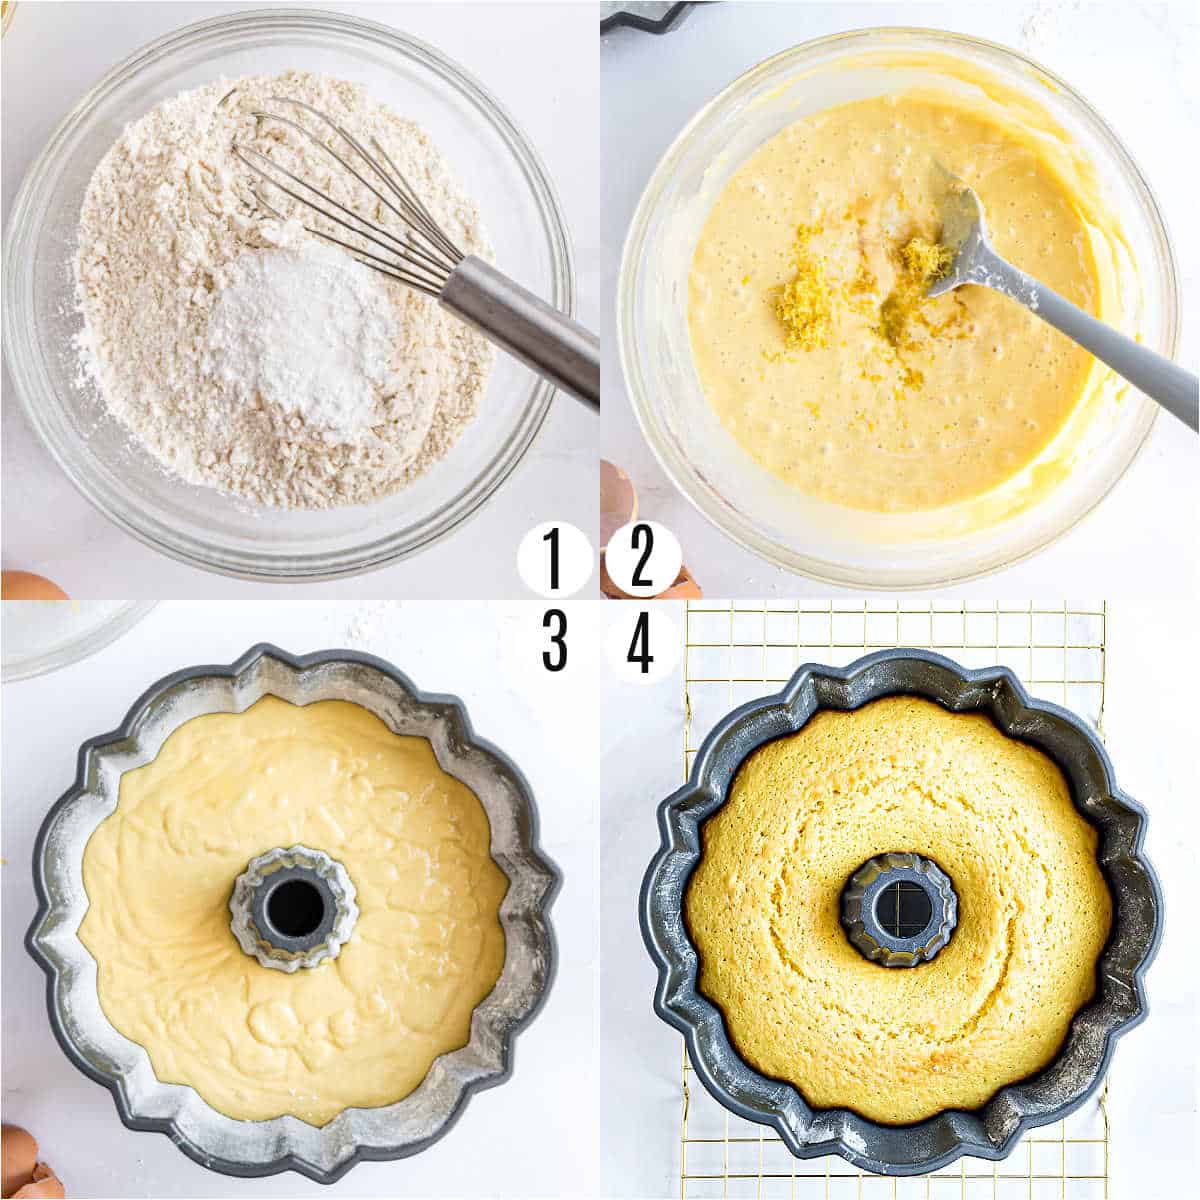 Step by step photos showing how to make lemon bundt cake.